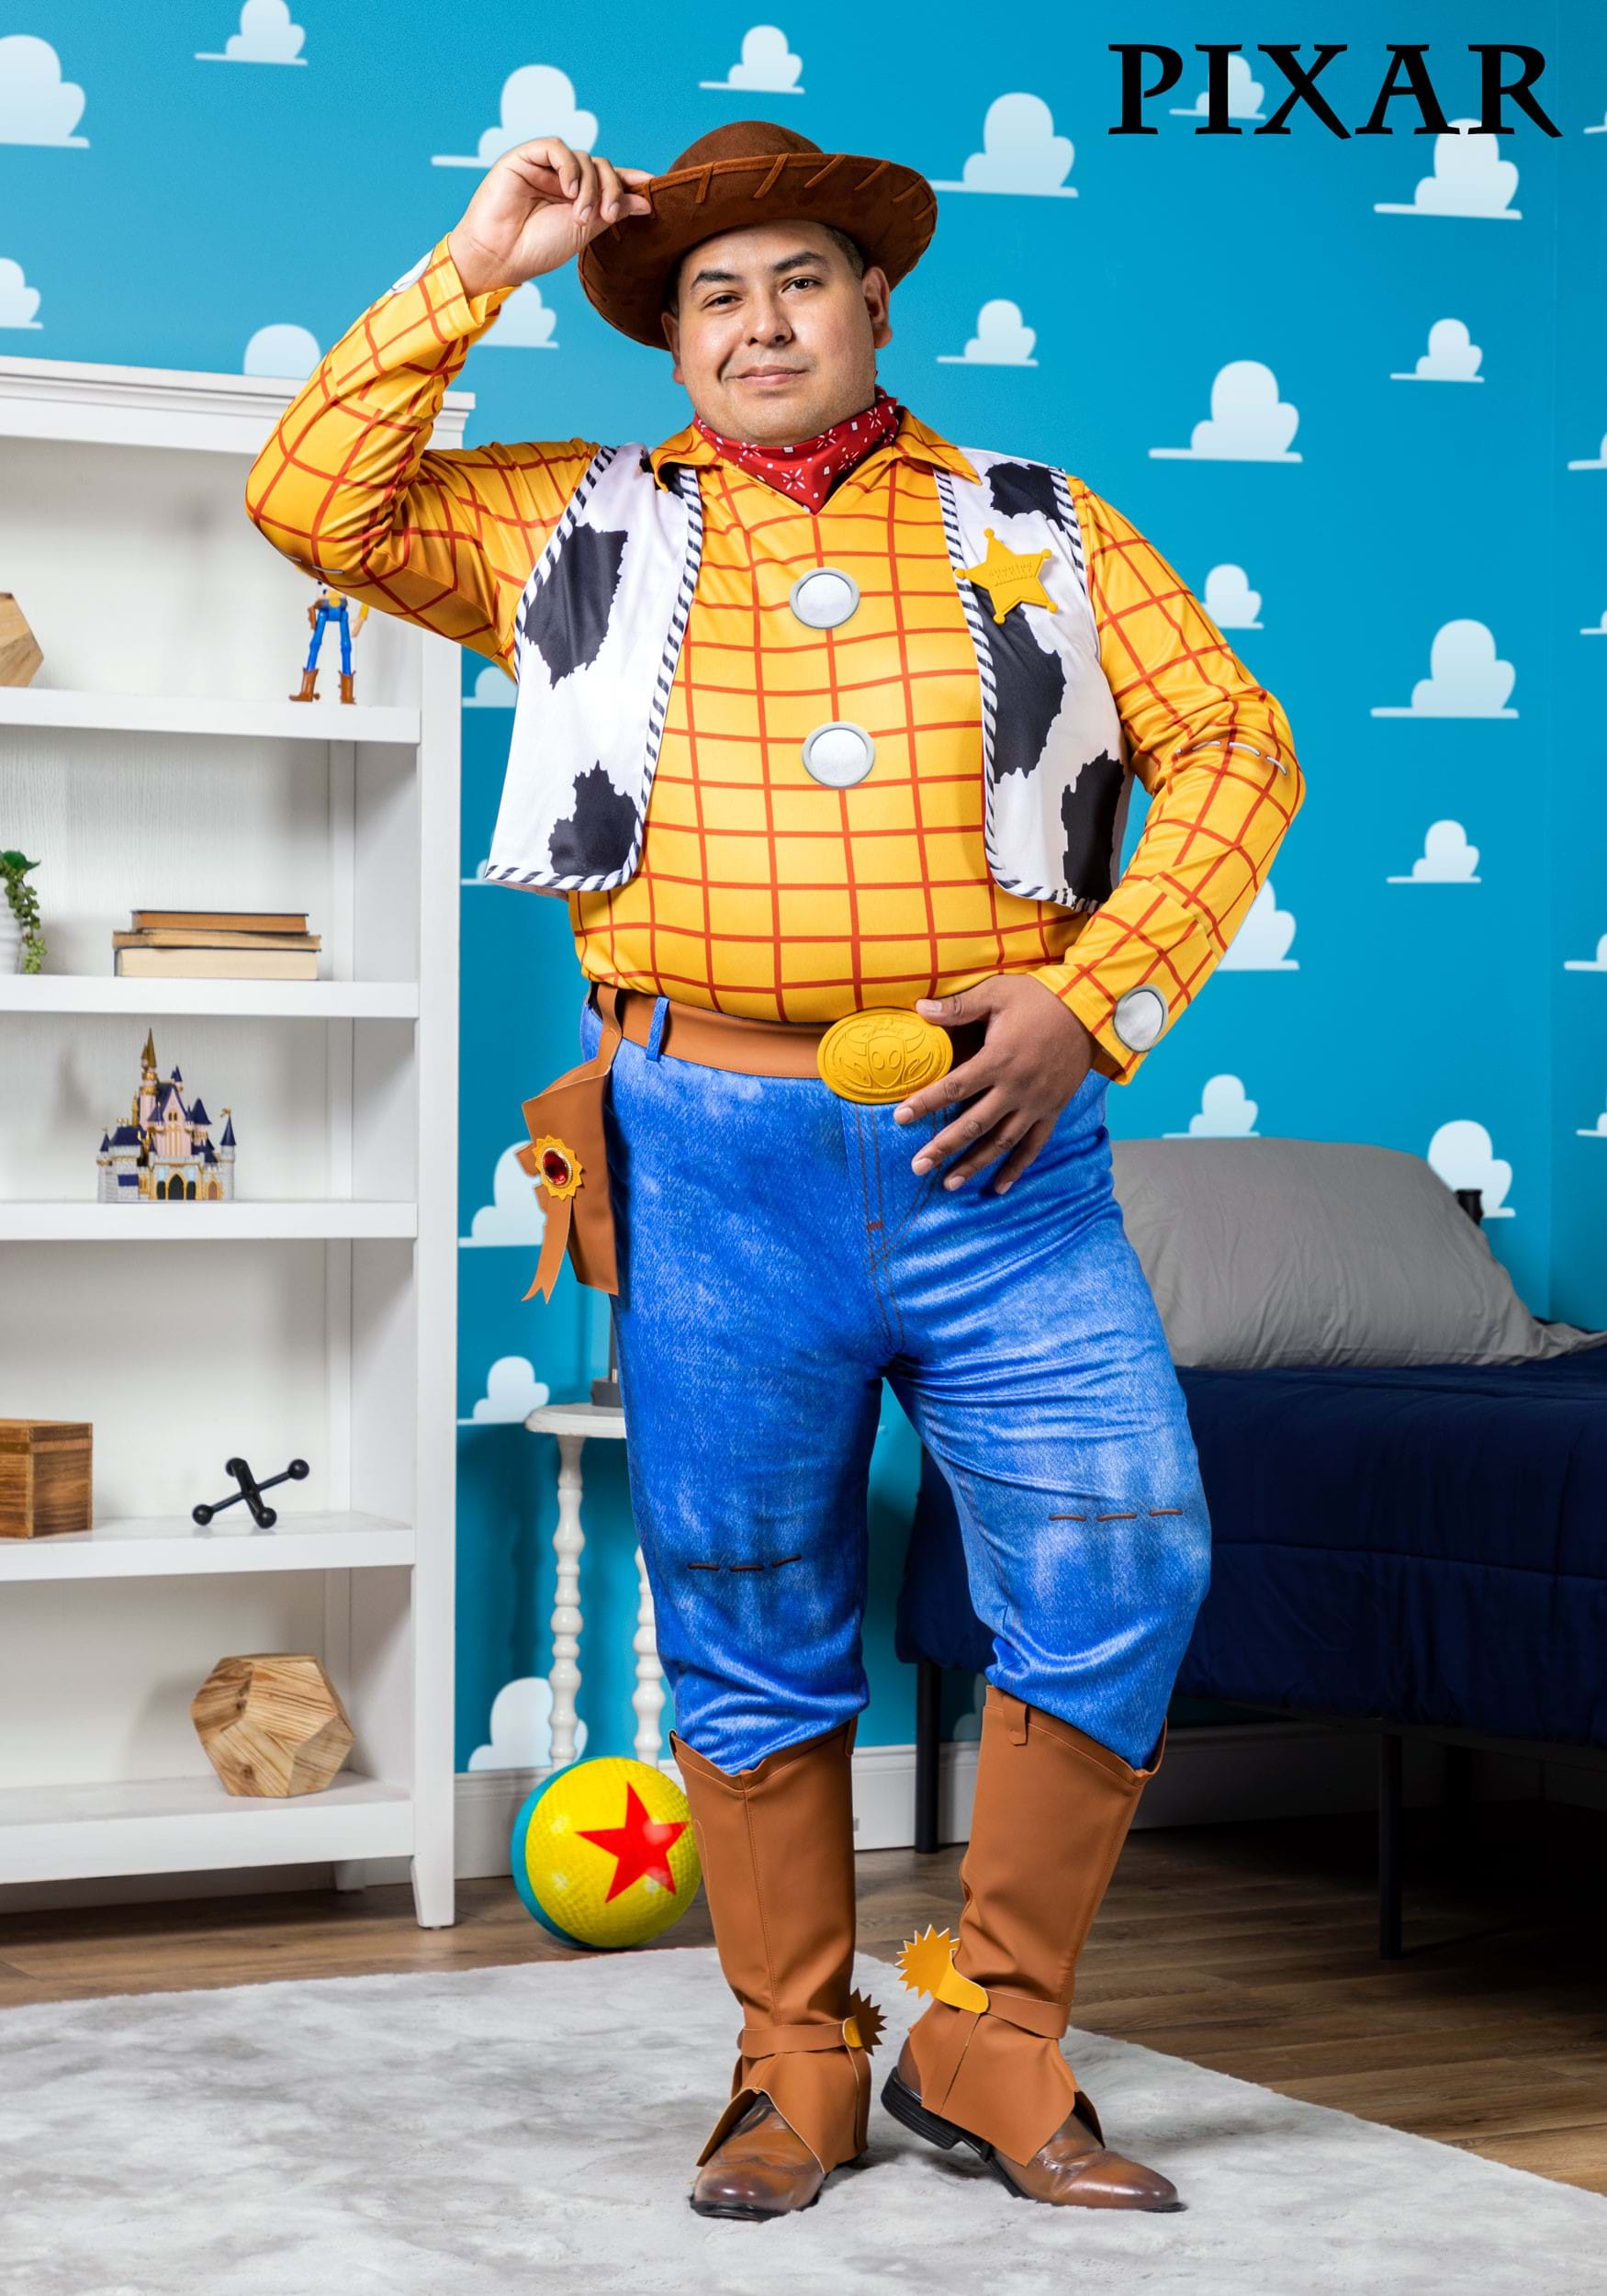 https://images.halloweencostumes.com/products/74855/1-1/plus-size-deluxe-woody-toy-story-costume-0.jpg